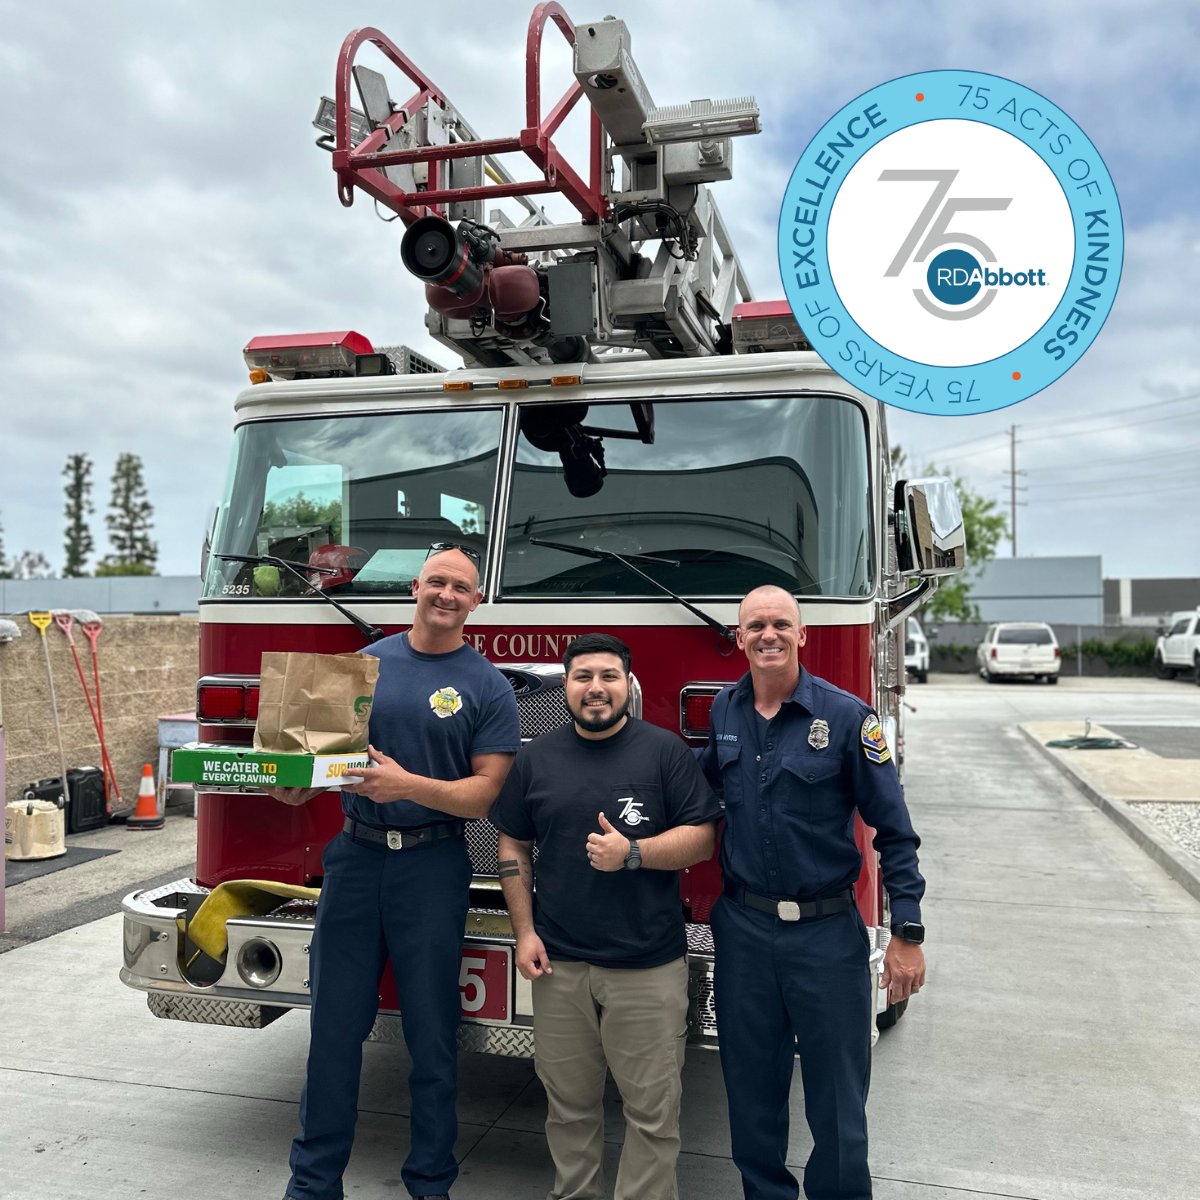 In honor of Int'l Firefighters' Day we treated our #Barberton & #GardenGrove fire stations to lunch. For all the fallen #firstresponders, & the families who live with their loss every day, we uphold & thank you for the sacrifices you've made. Learn more at firefightersday.org